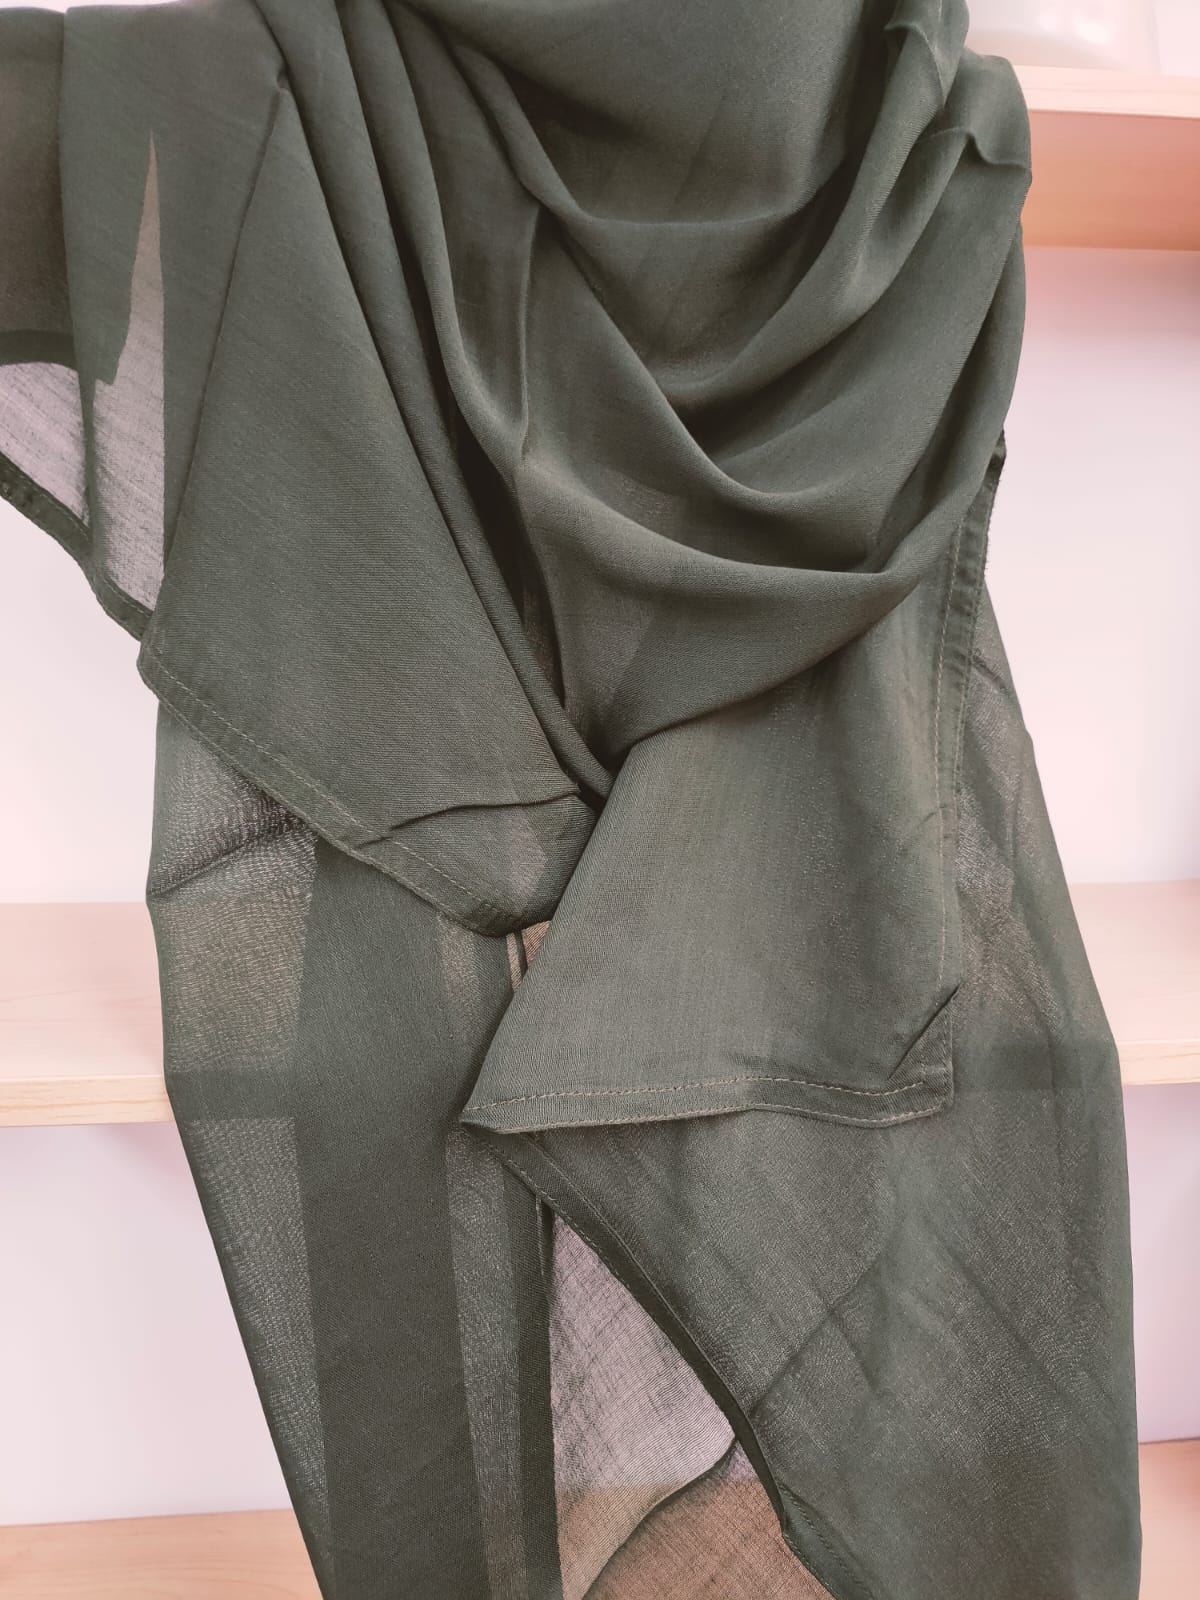 Introducing our exquisite Modal Hijab in Olive Green, a sophisticated choice for the discerning modest woman, at Hikmah Boutique! Crafted with precision from premium modal fabric, cherished for its gentle touch and breathability, this modal hijab promises enduring comfort and style. Based in Australia, Deliver Worldwide. 